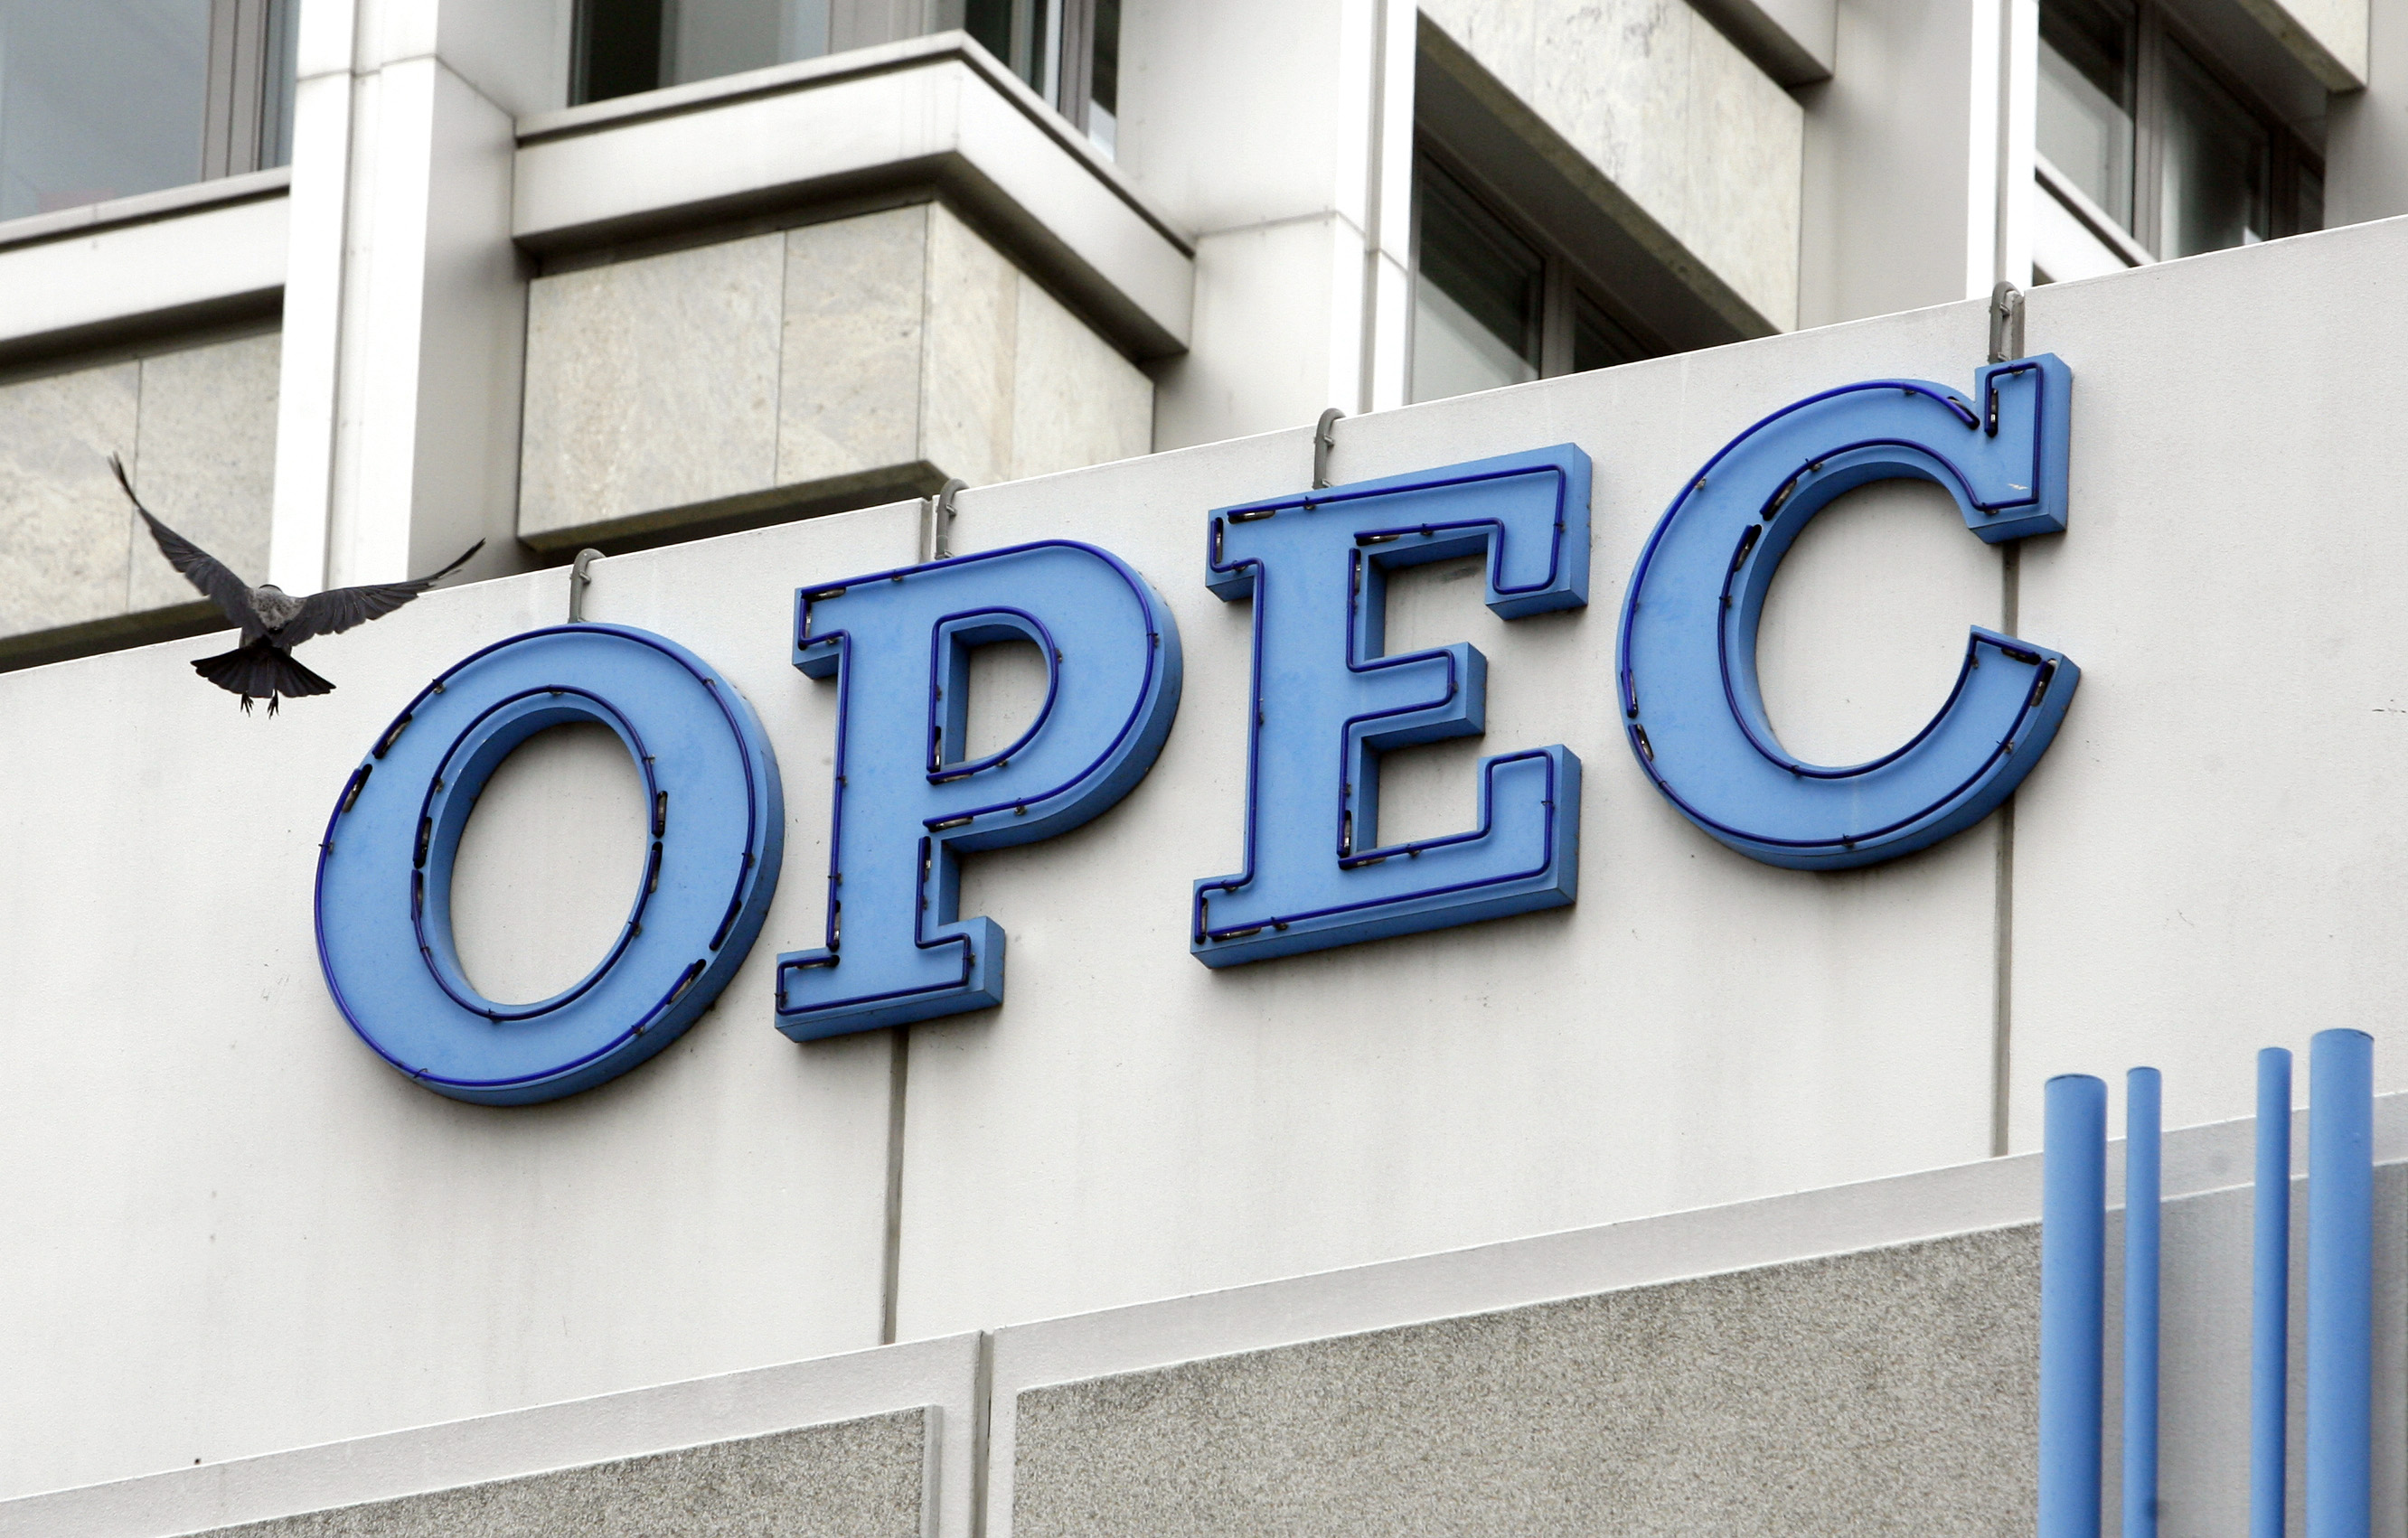 Opec’s output at lowest level in six months